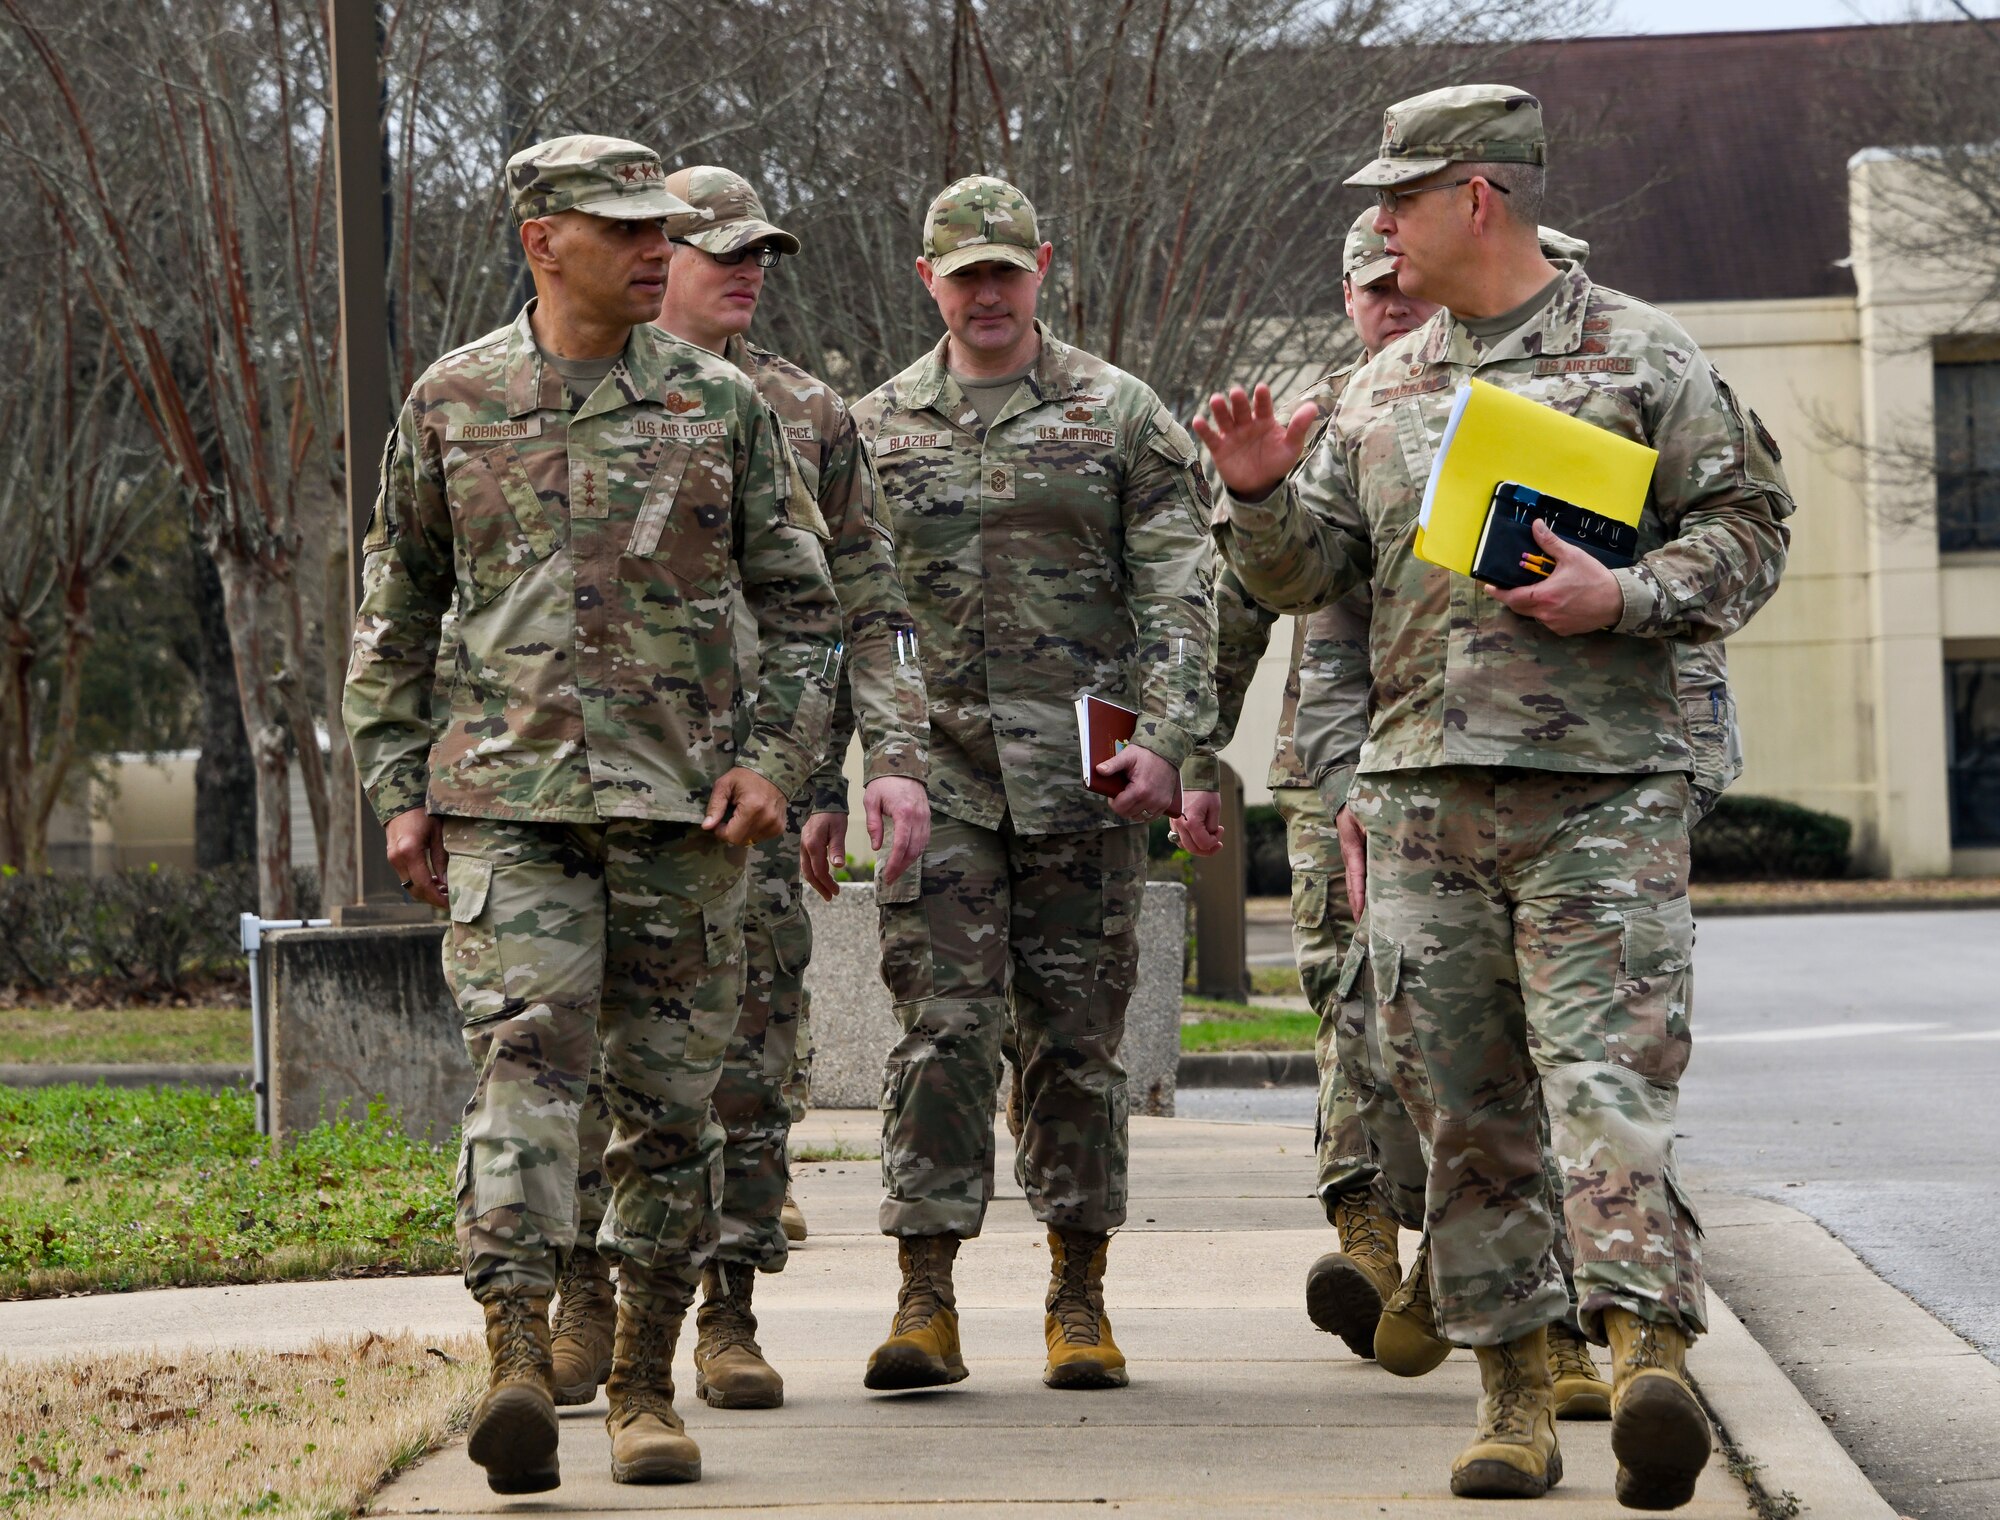 Lt. Gen. Brian Robinson, commander of Air Education and Training Command, walks with Col. Anthony Babcock, Barnes Center for Enlisted Education commander, during a visit to Maxwell Air Force Base, Alabama, Feb. 23, 2023. (U.S. Air Force photo by Brian Ferguson)